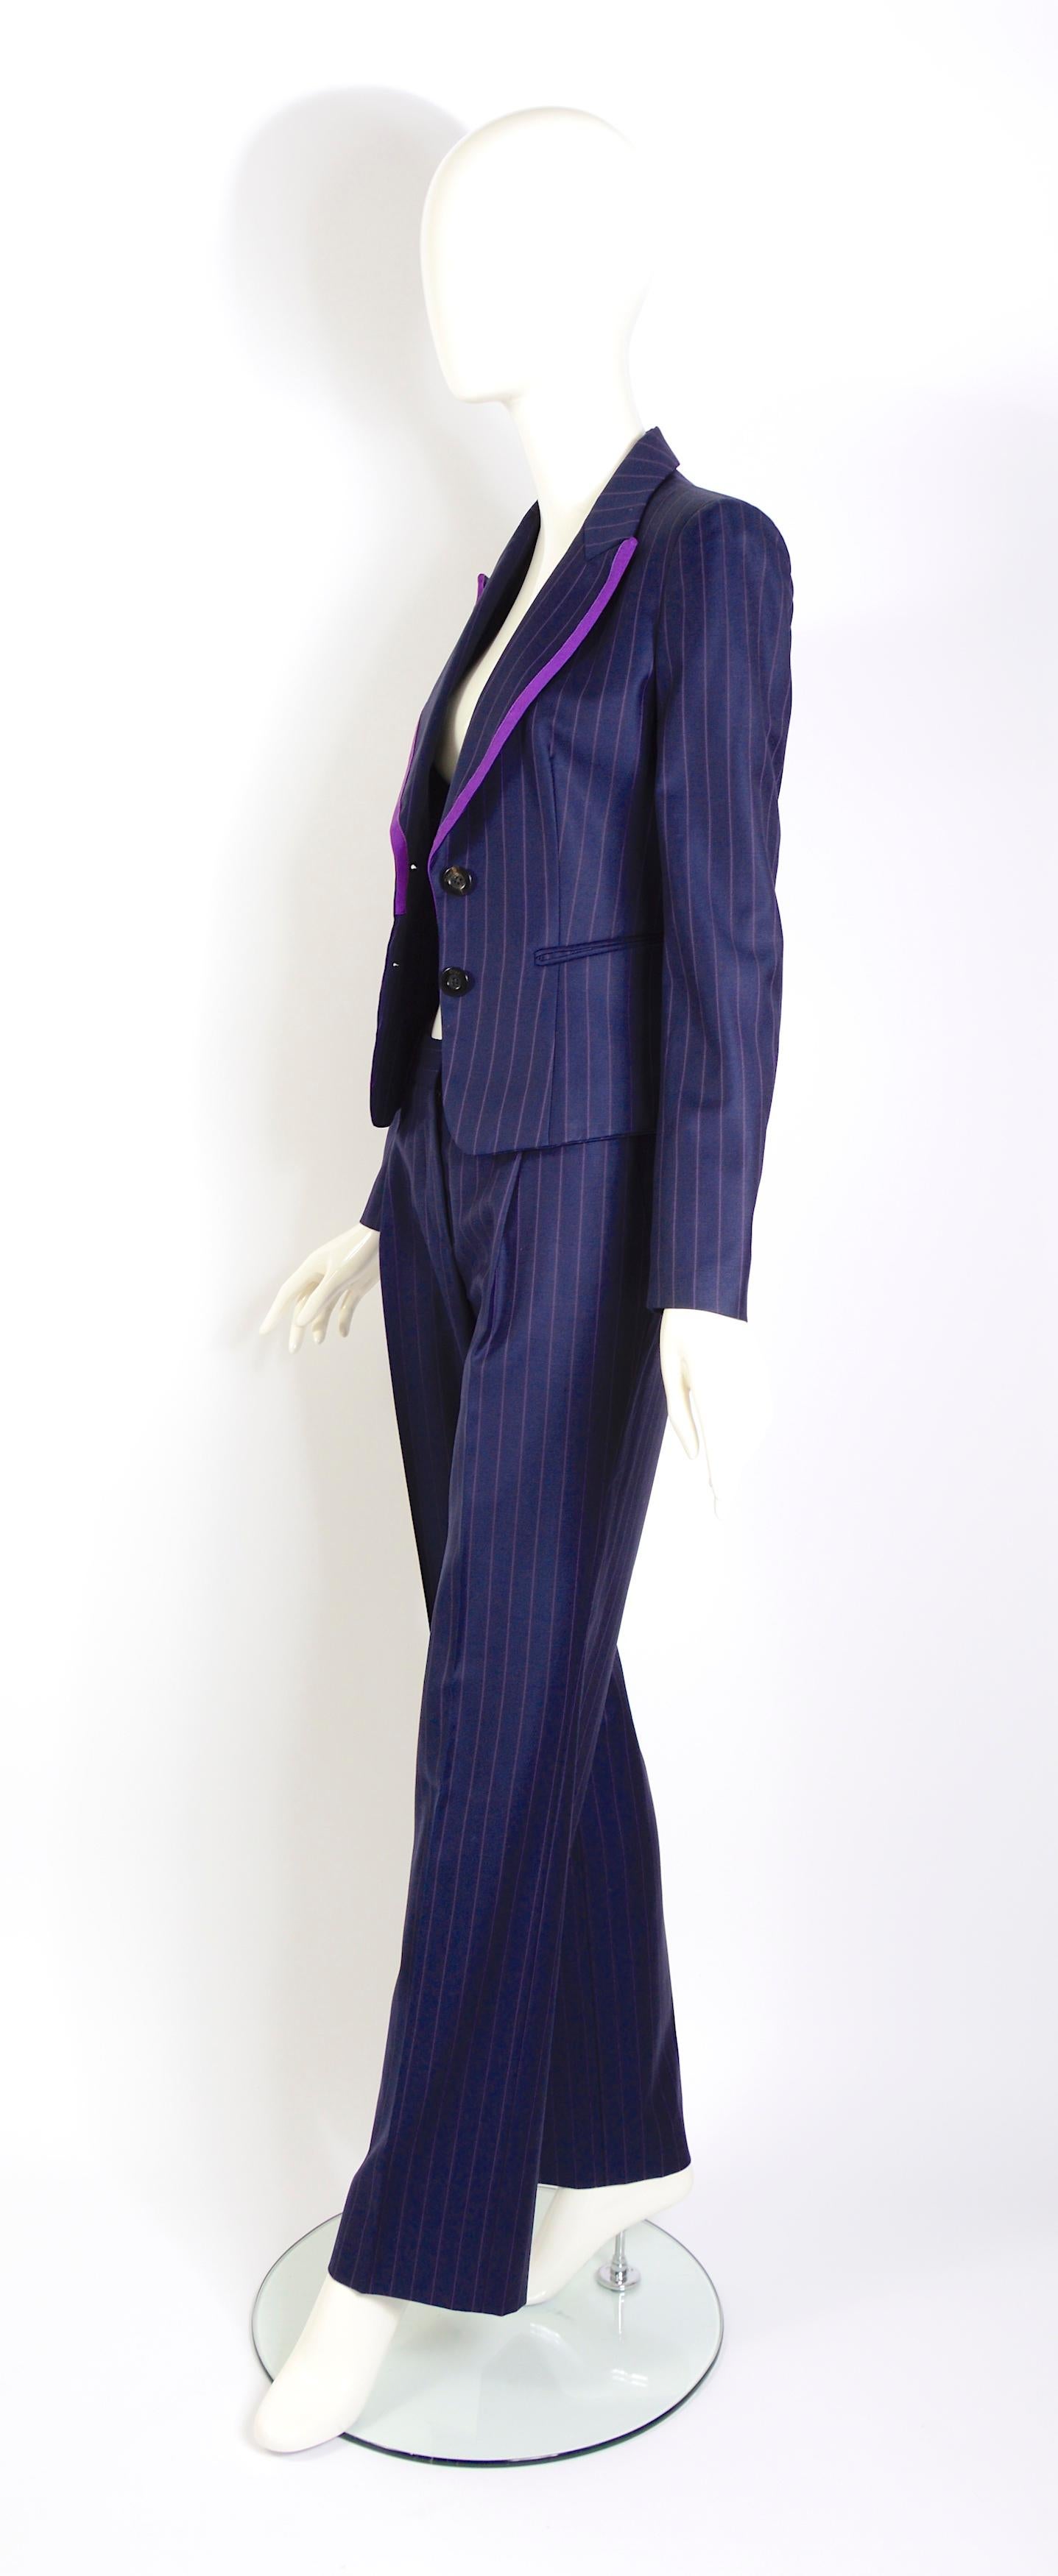 Women's Christian Dior by John Galliano vintage S/S 2008 pin striped suit